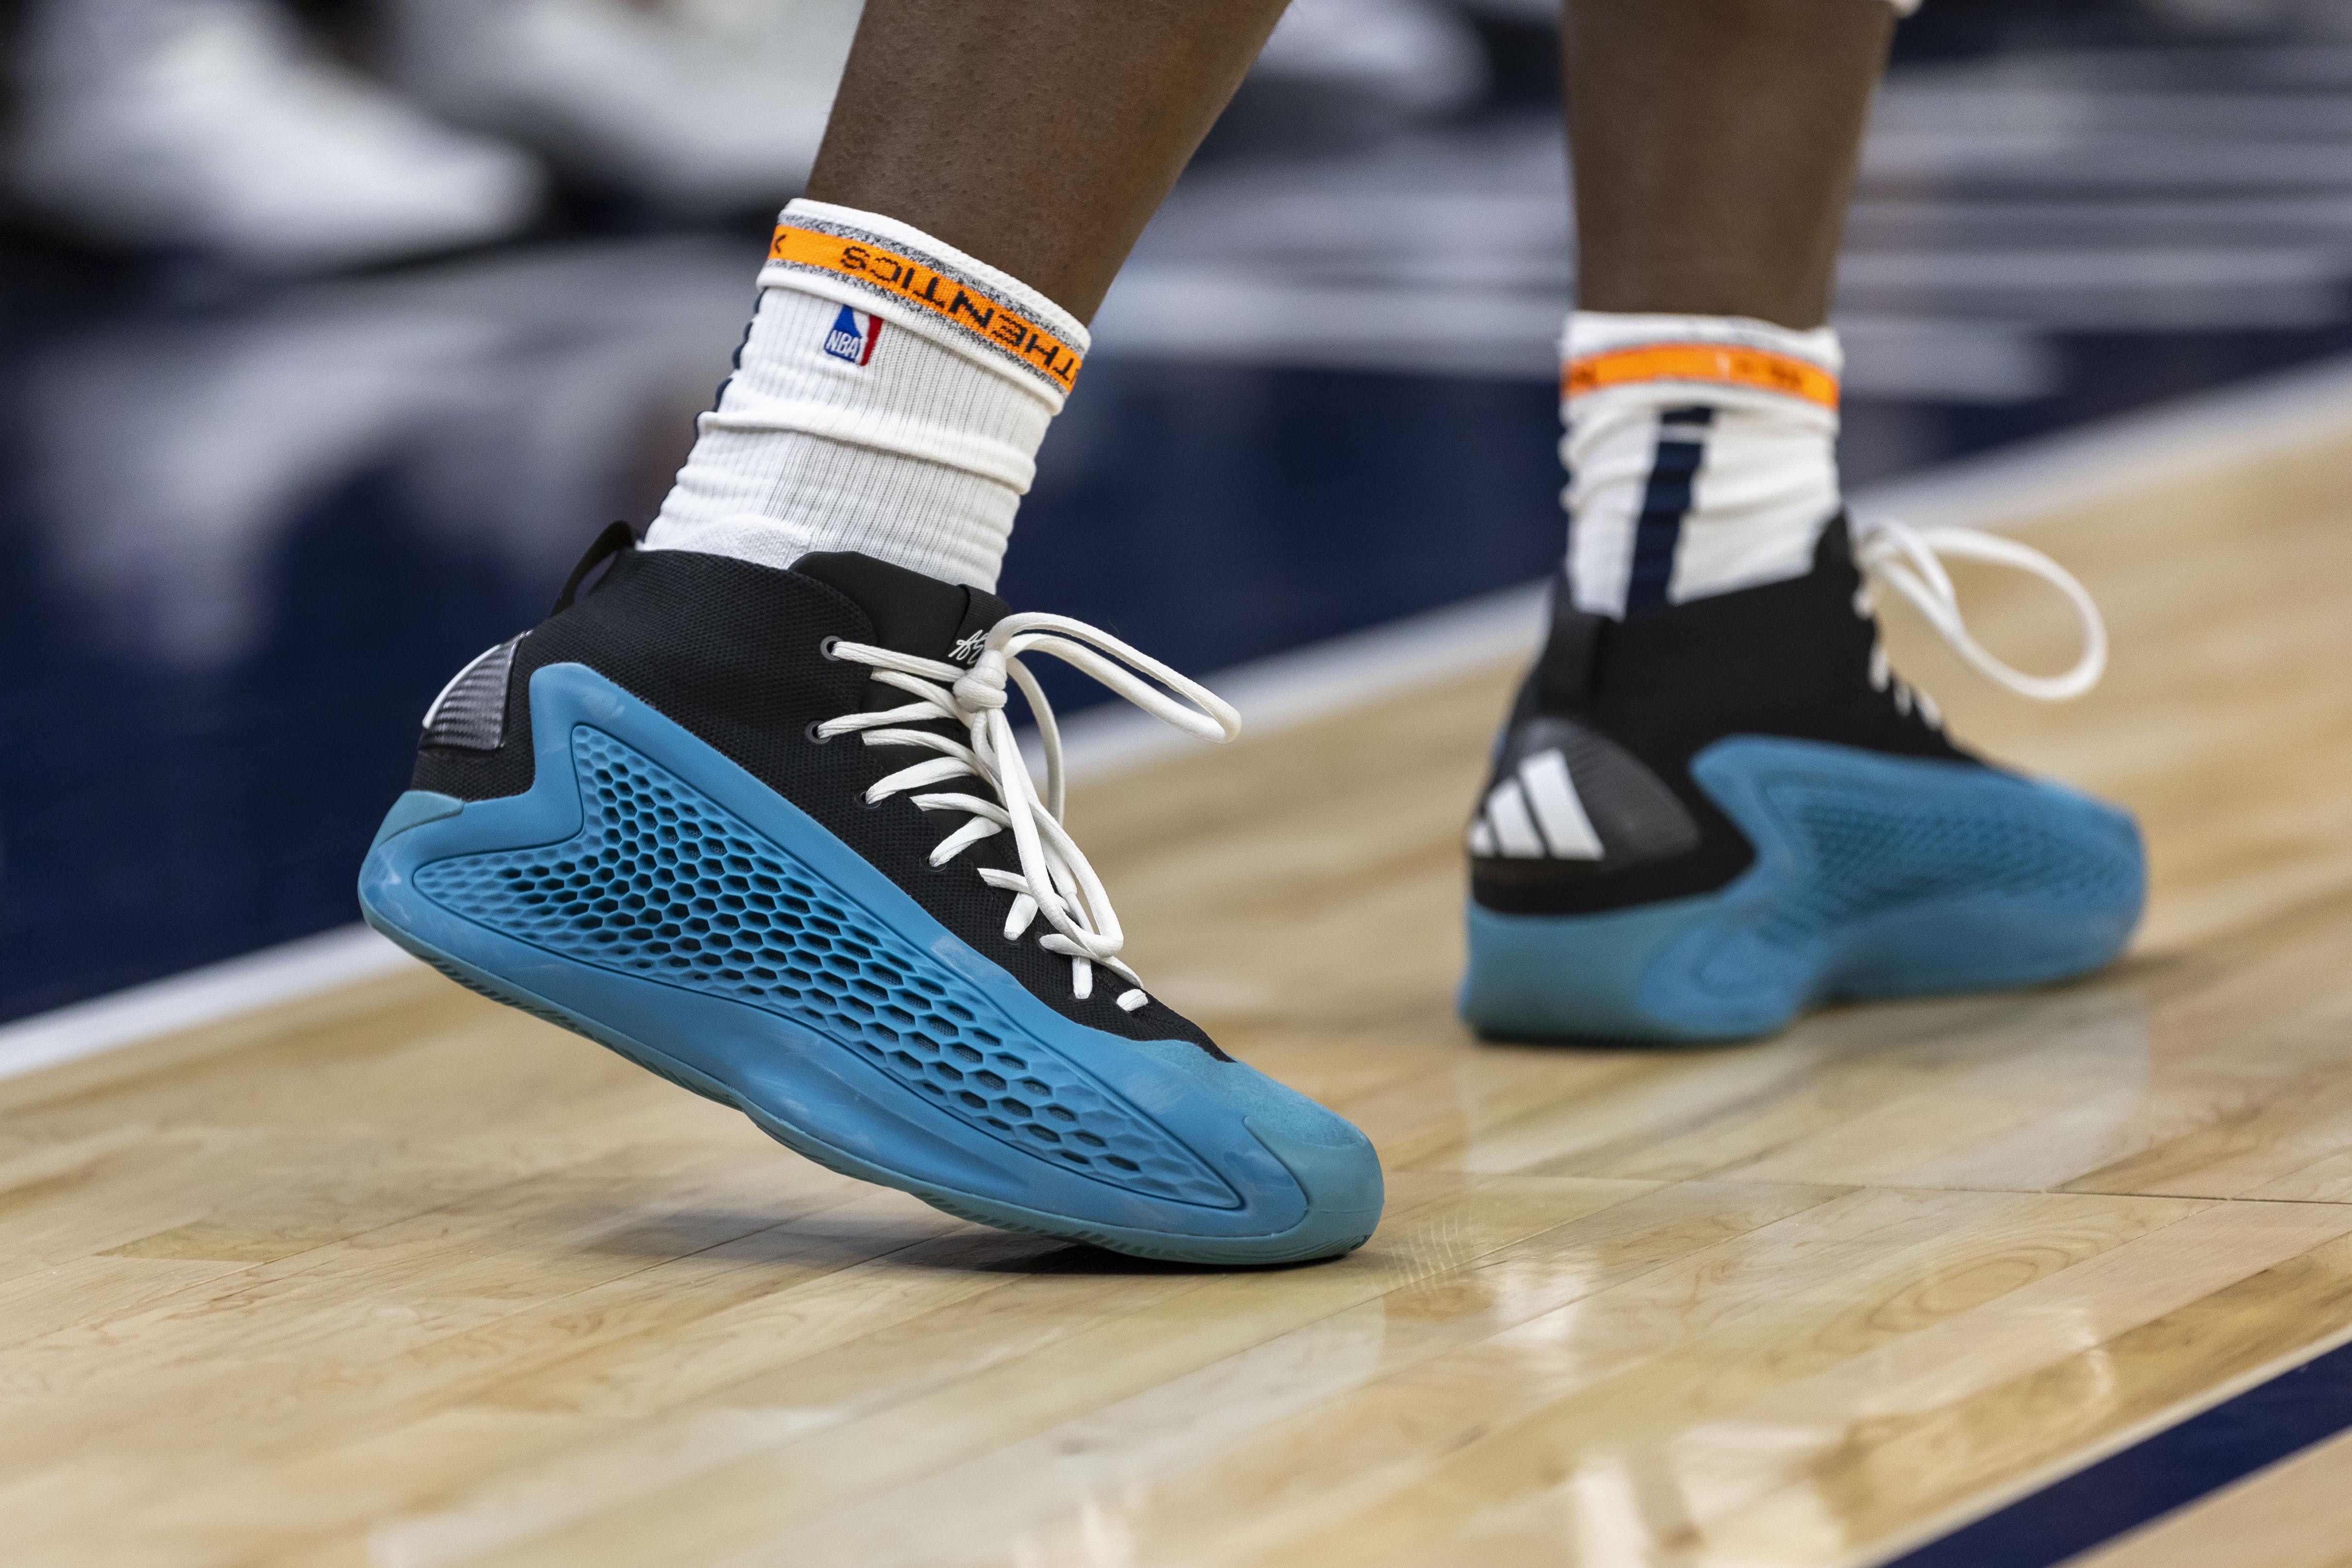 Minnesota Timberwolves guard Anthony Edwards' blue and black adidas sneakers.